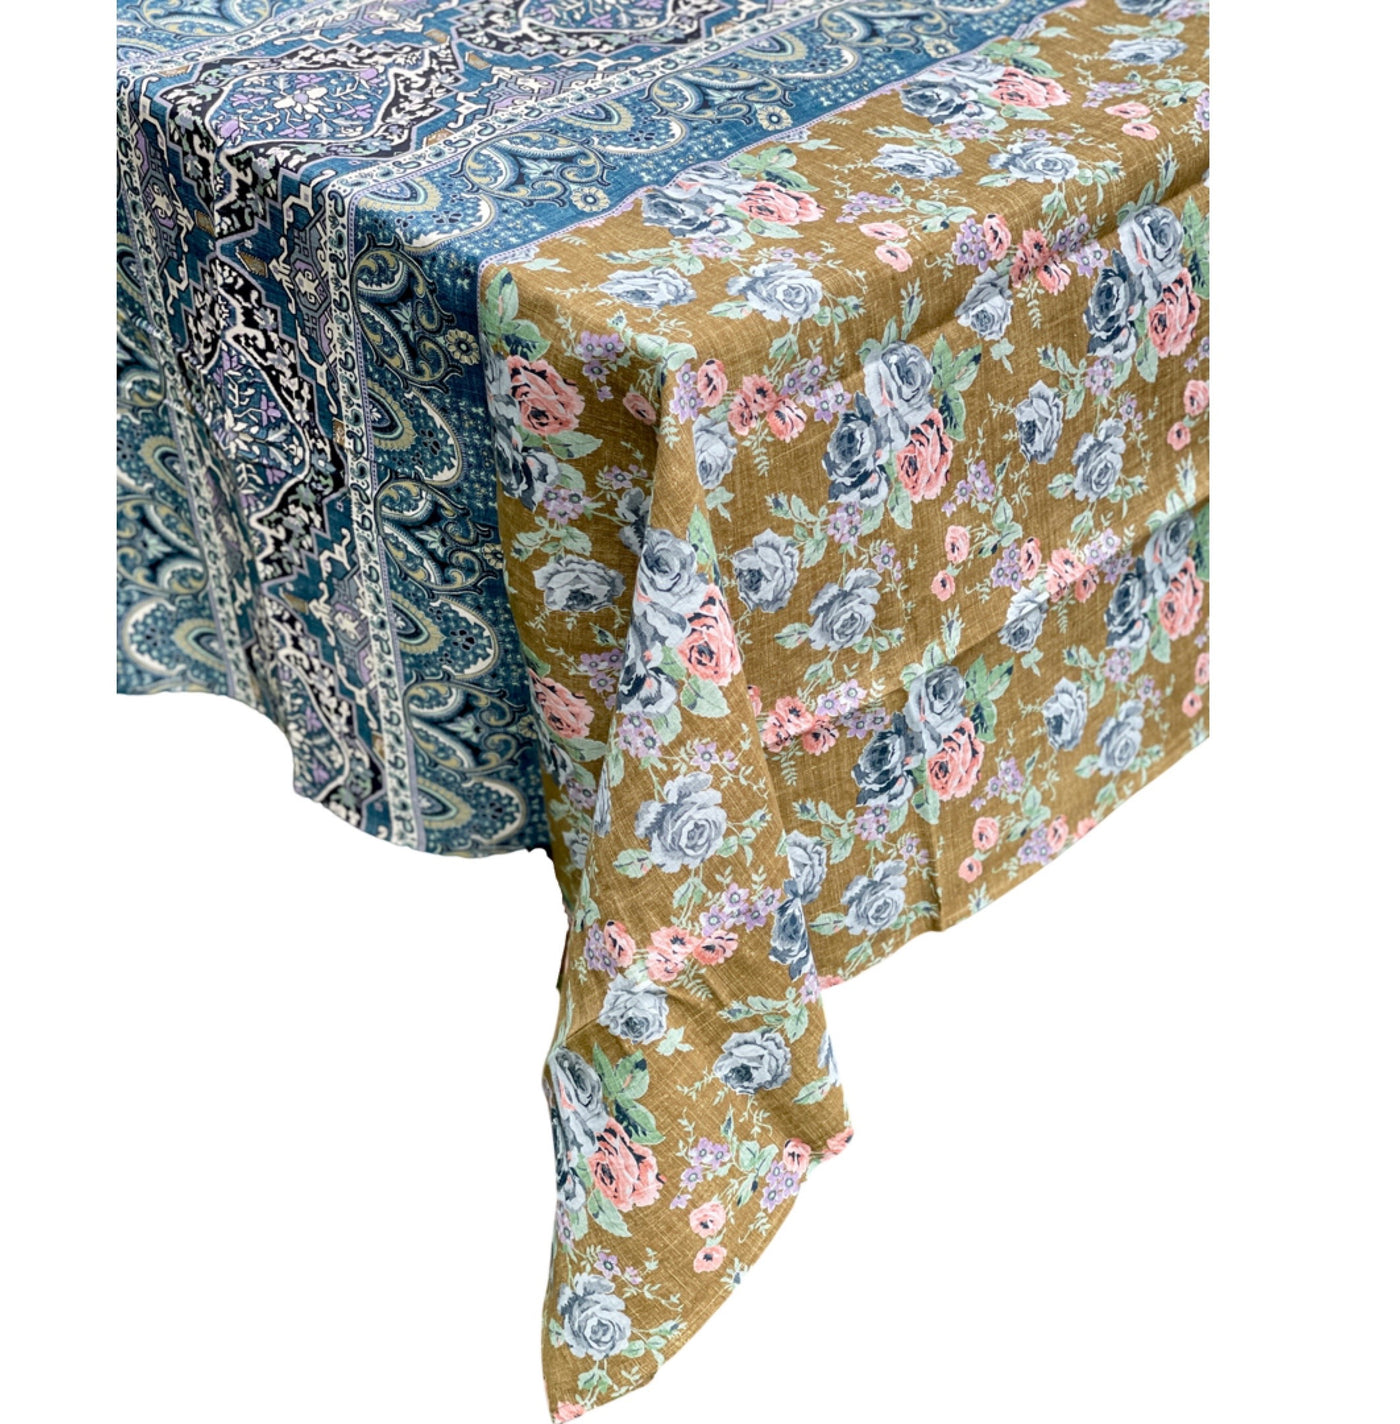 'Marley - Blue & Mustard' Tablecloth by D'Ascoli